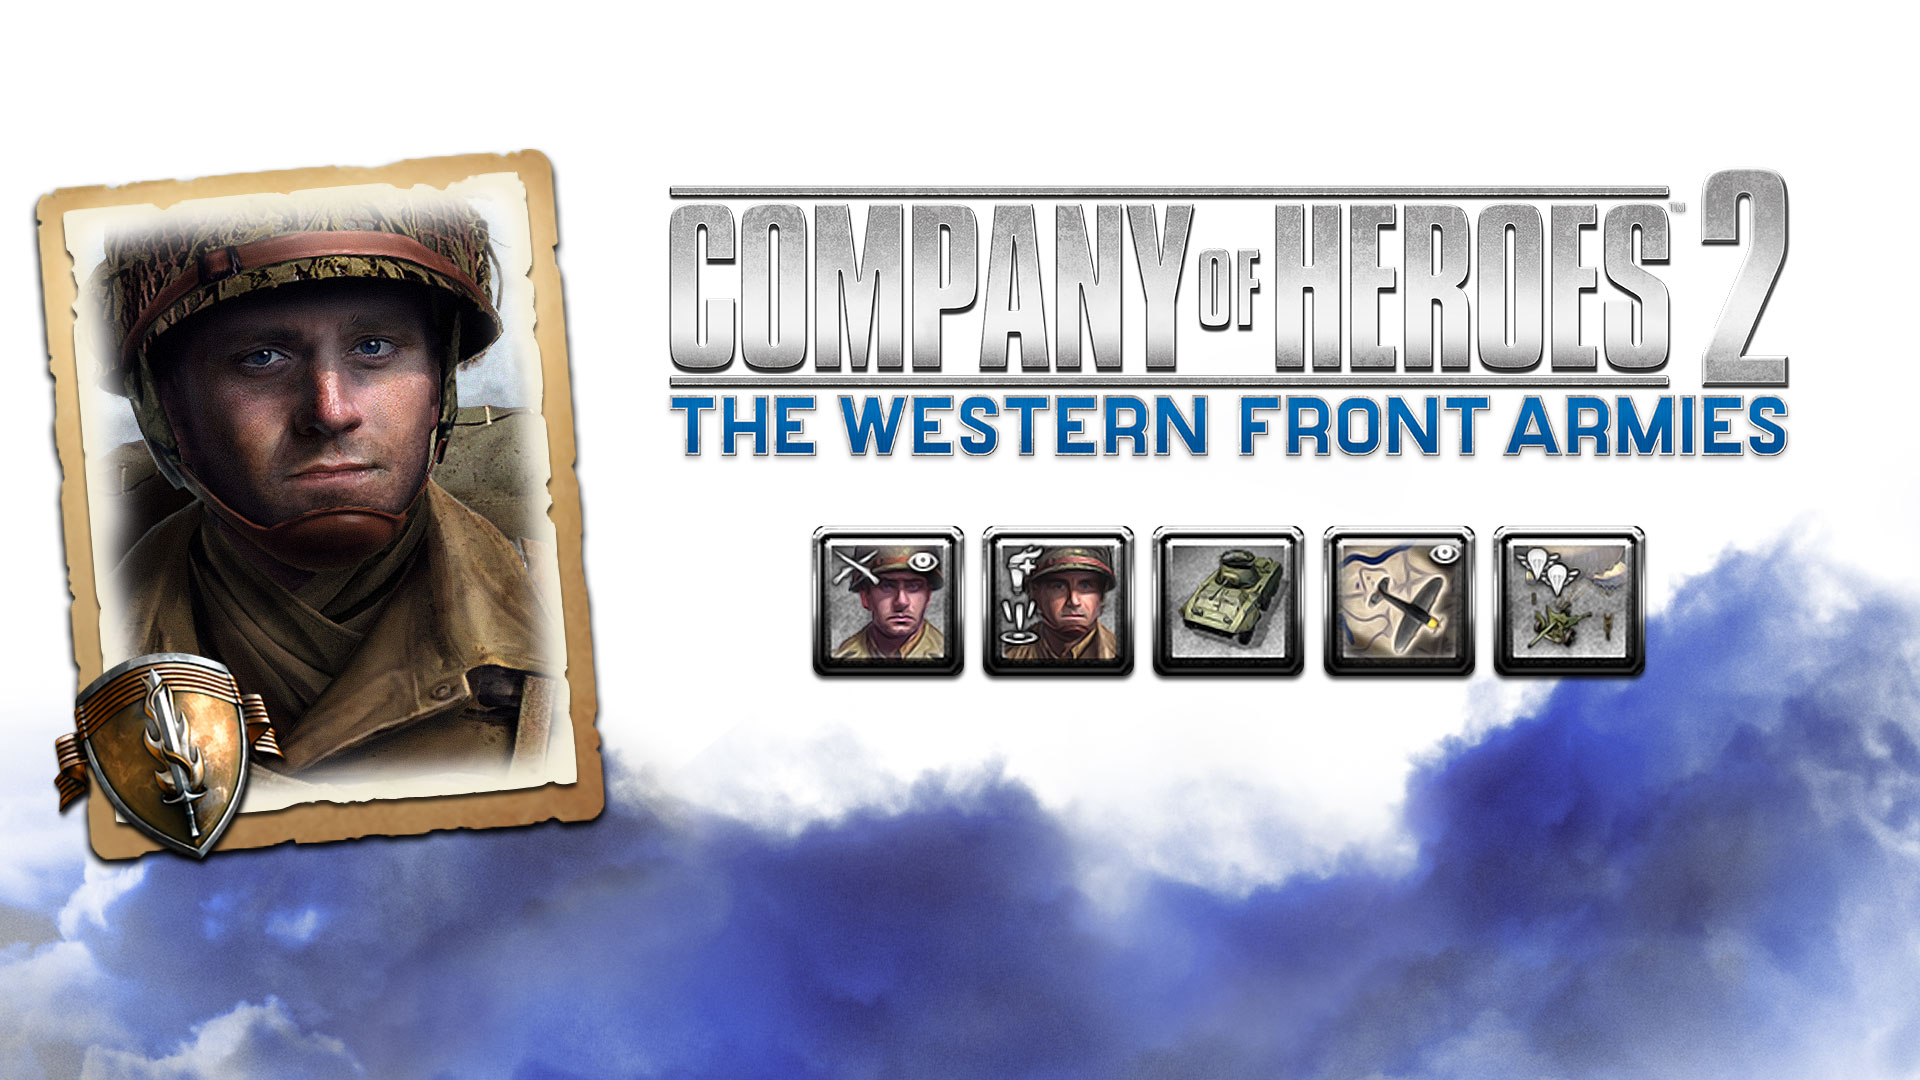 Company of Heroes 2 - US Forces Commander: Recon Support Company DLC Steam CD Key, $10.16